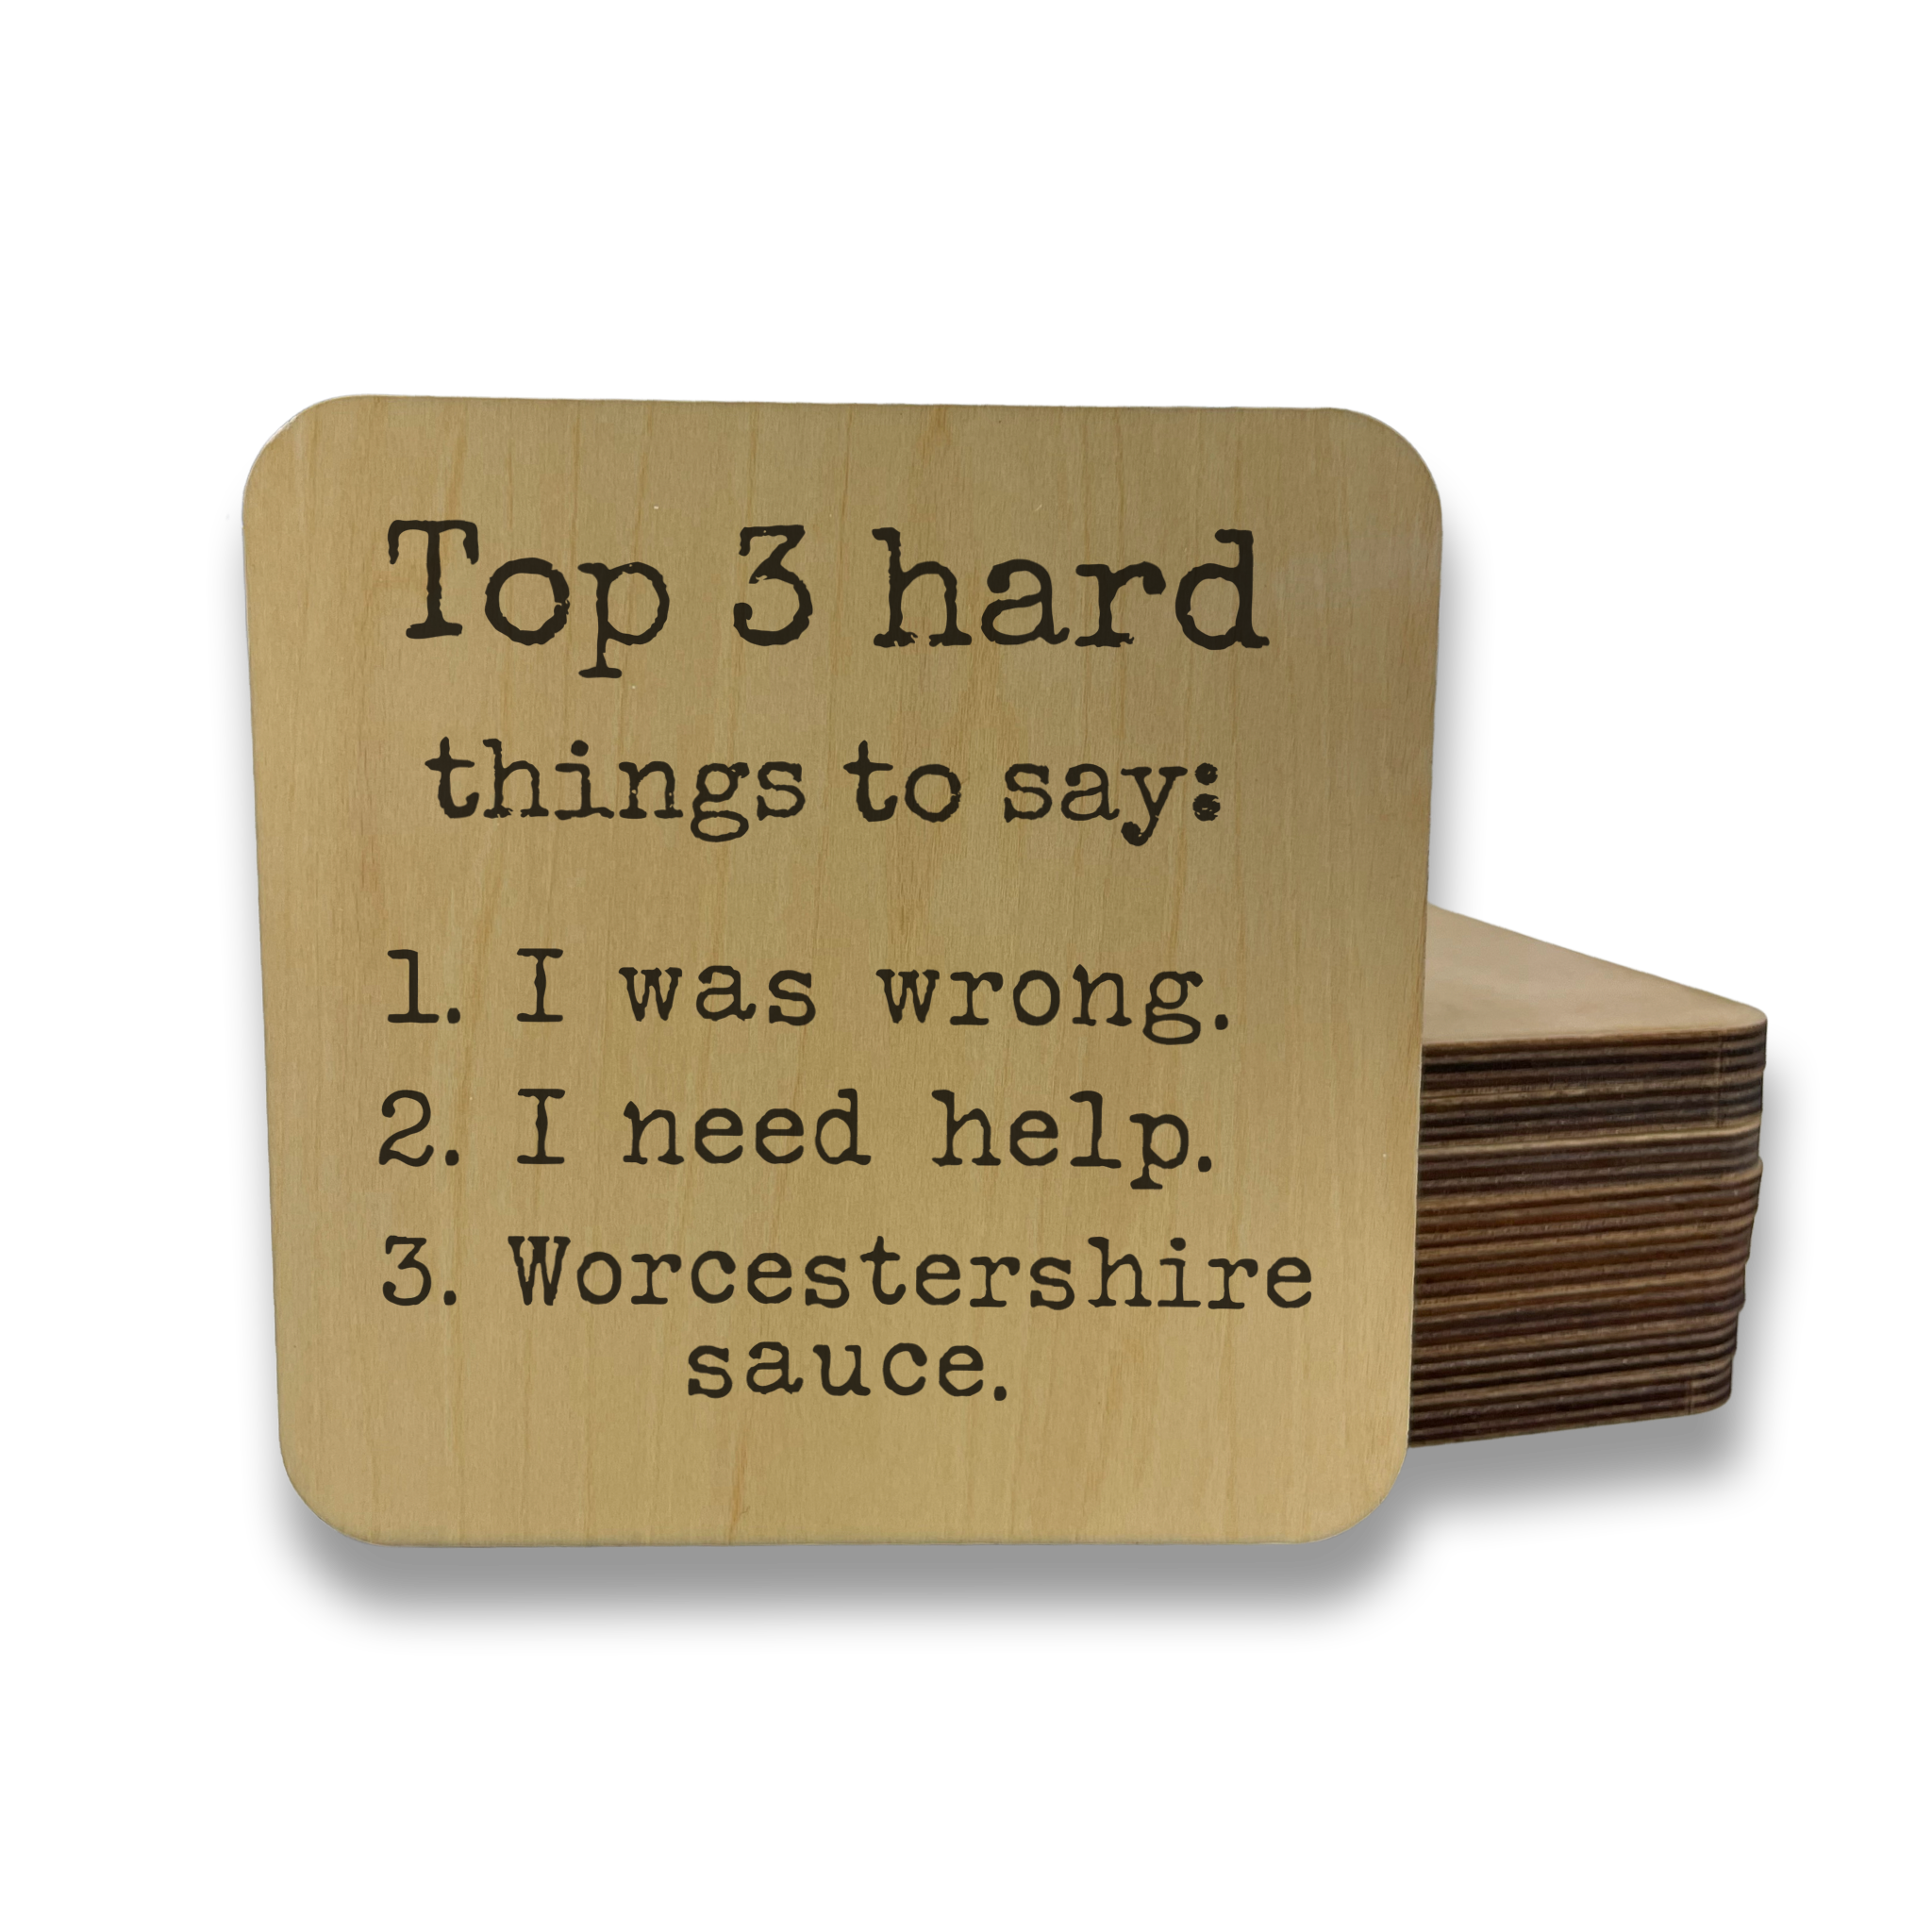 TOP 3 HARD THINGS TO SAY DK MAGNET / DRINK COASTER